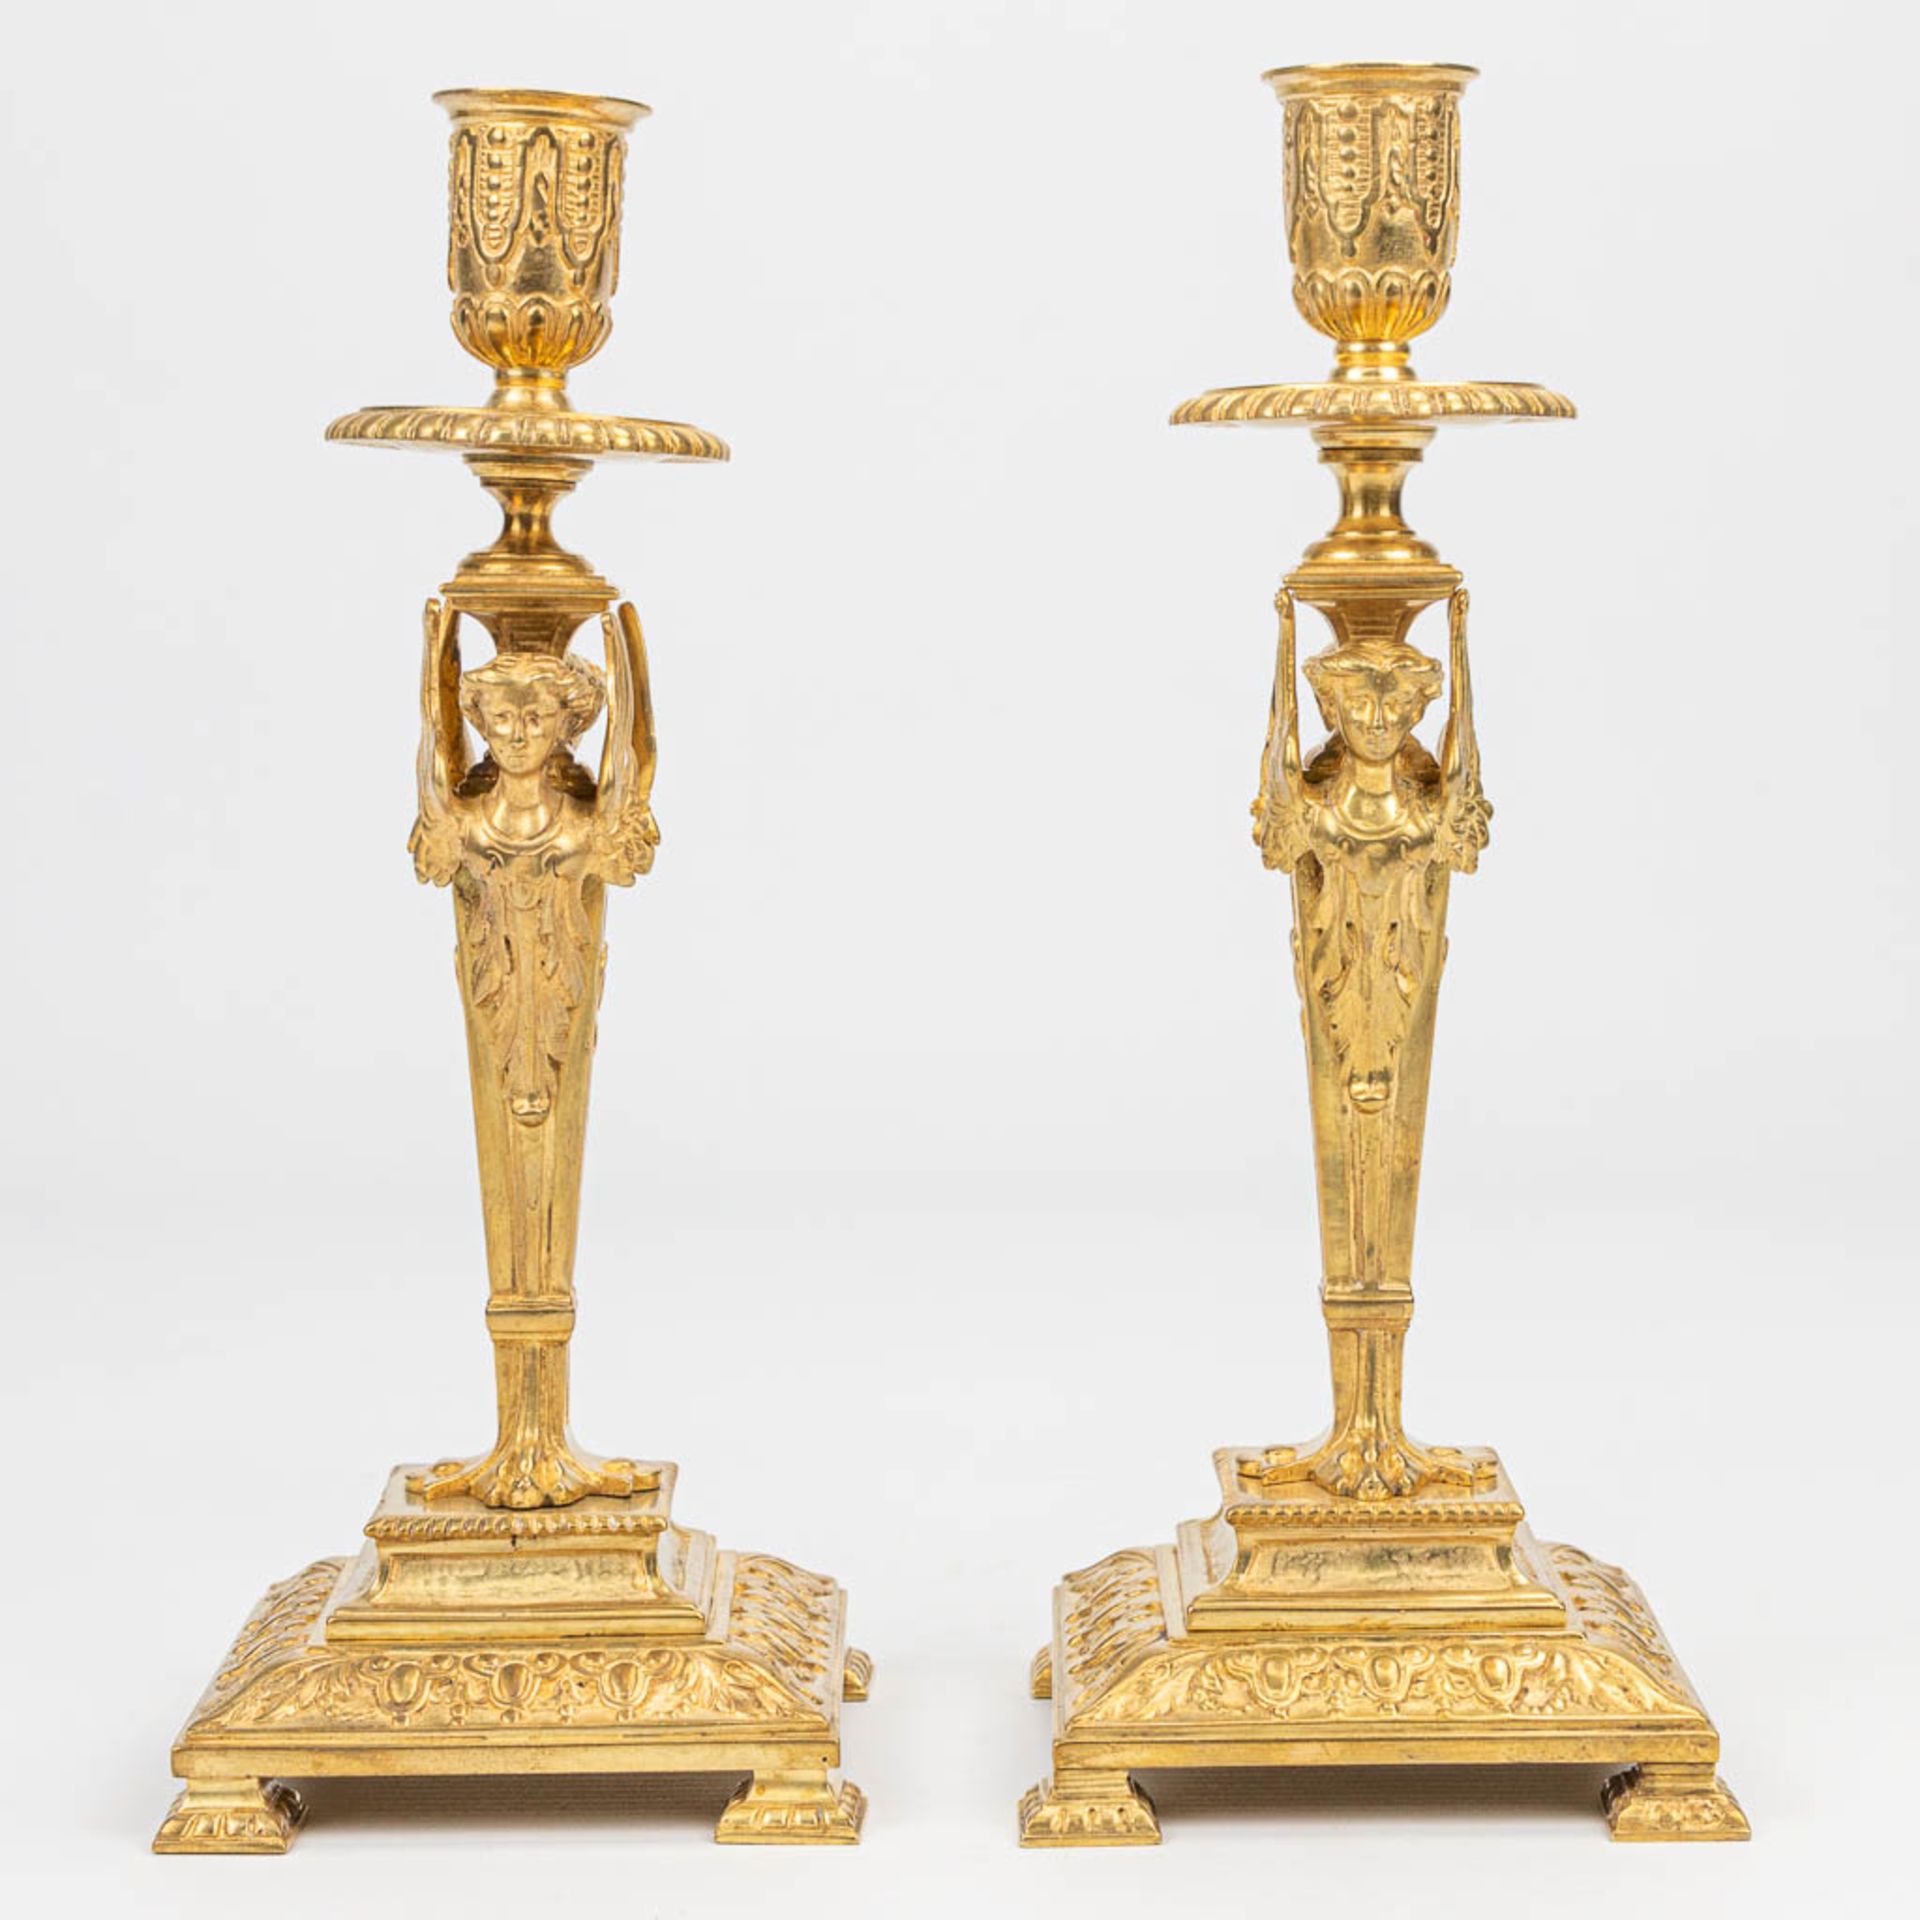 a pair of gilt Napoleon 3 bronze candlesticks, decorated with angels. (11 x 11 x 26,5 cm) - Image 4 of 6